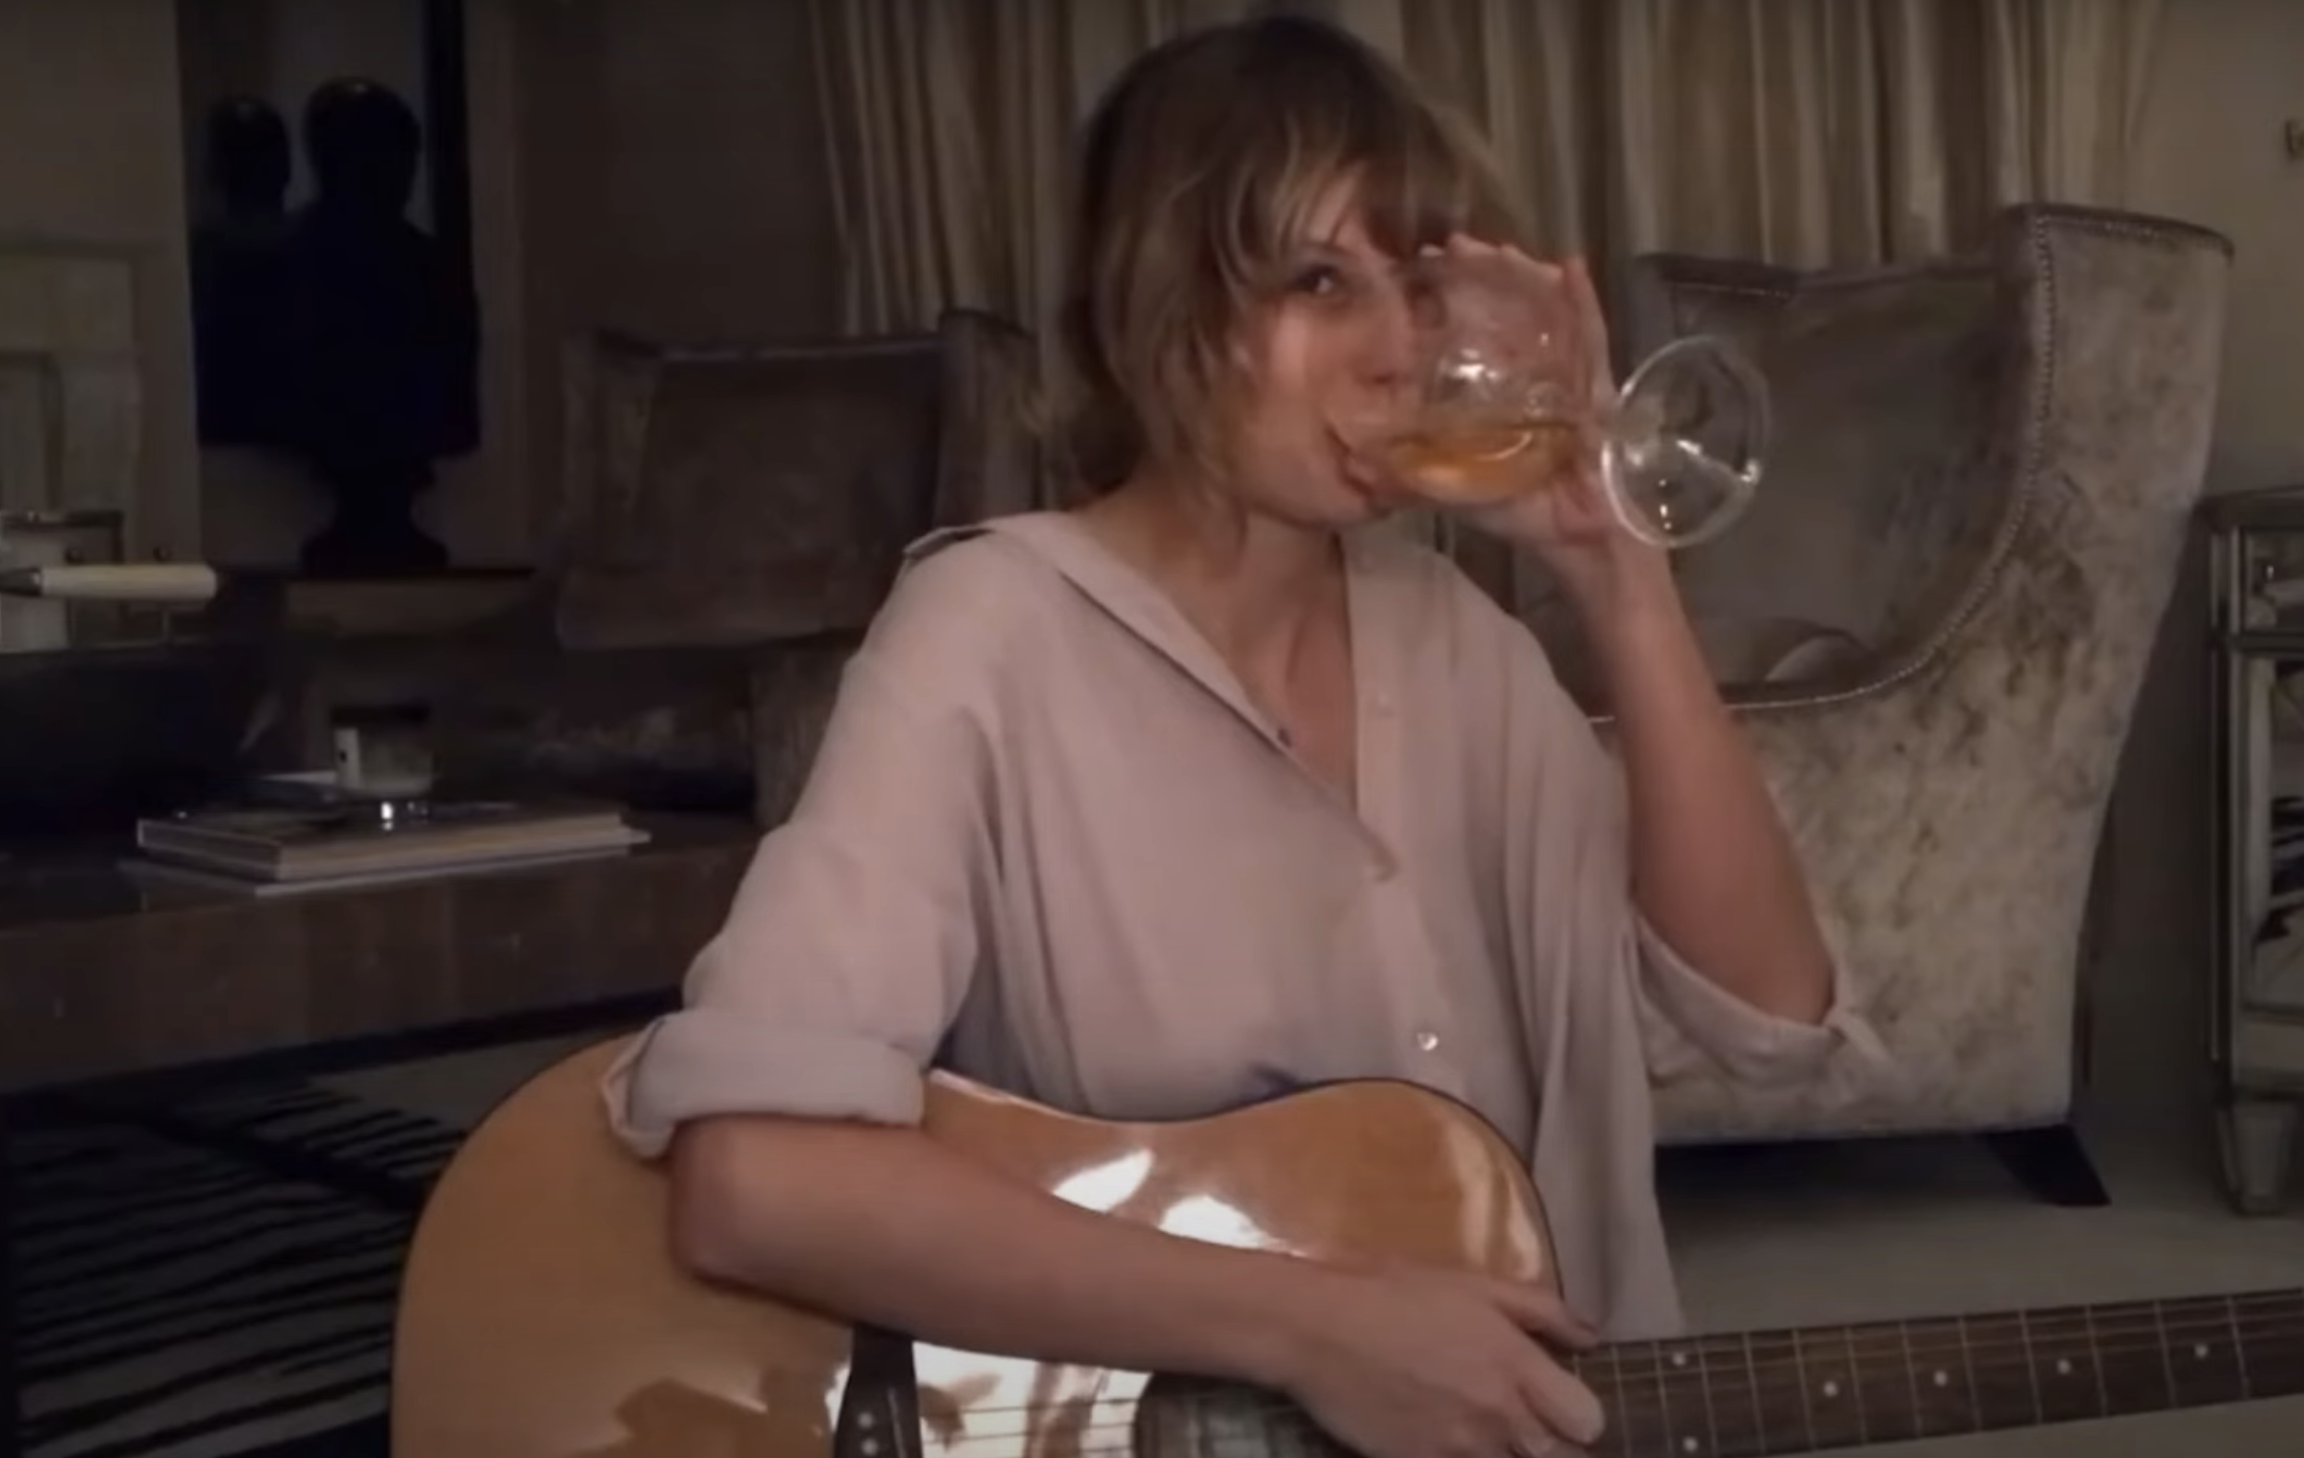 Close-up of Taylor drinking from a wine glass and holding a guitar